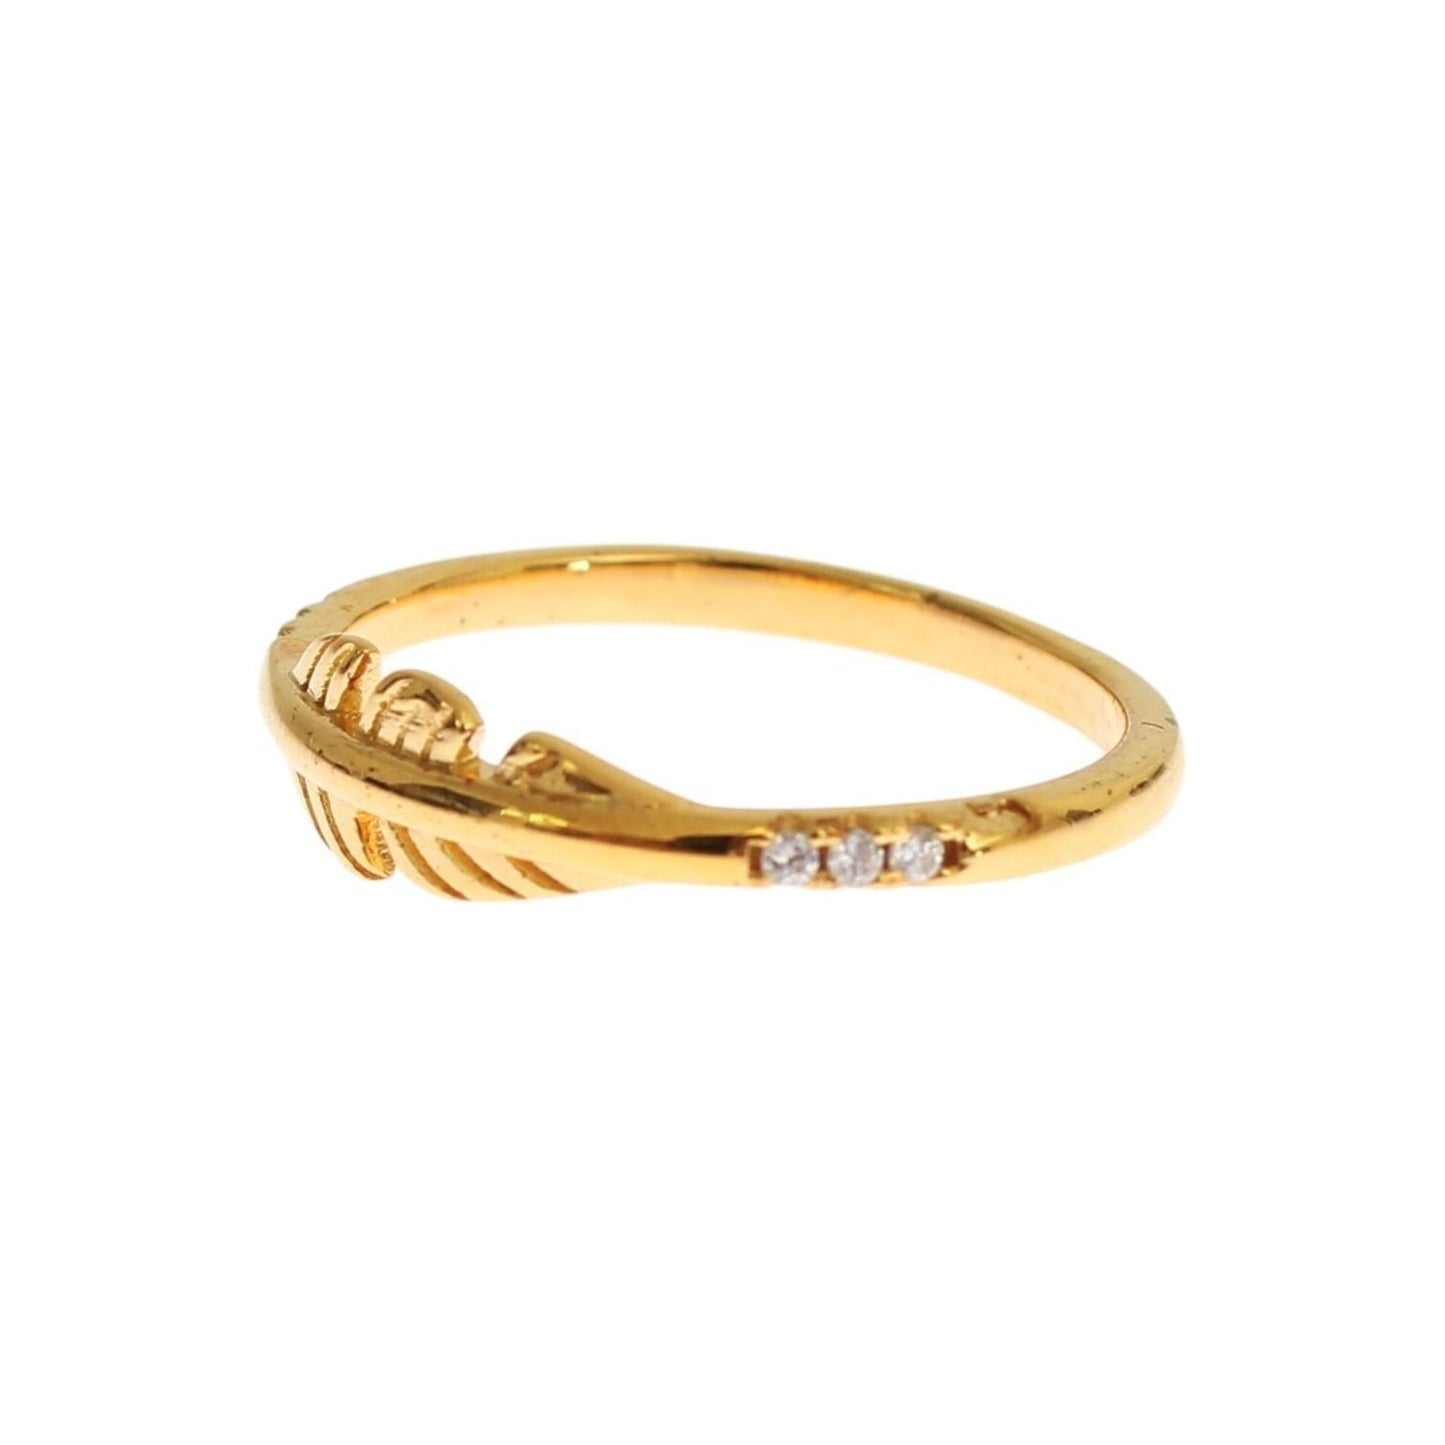 Nialaya Elegant Gold Plated Sterling Silver CZ Ring Ring gold-clear-cz-925-silver-ring s-l1600-100-2-3cf1122e-a29.jpg